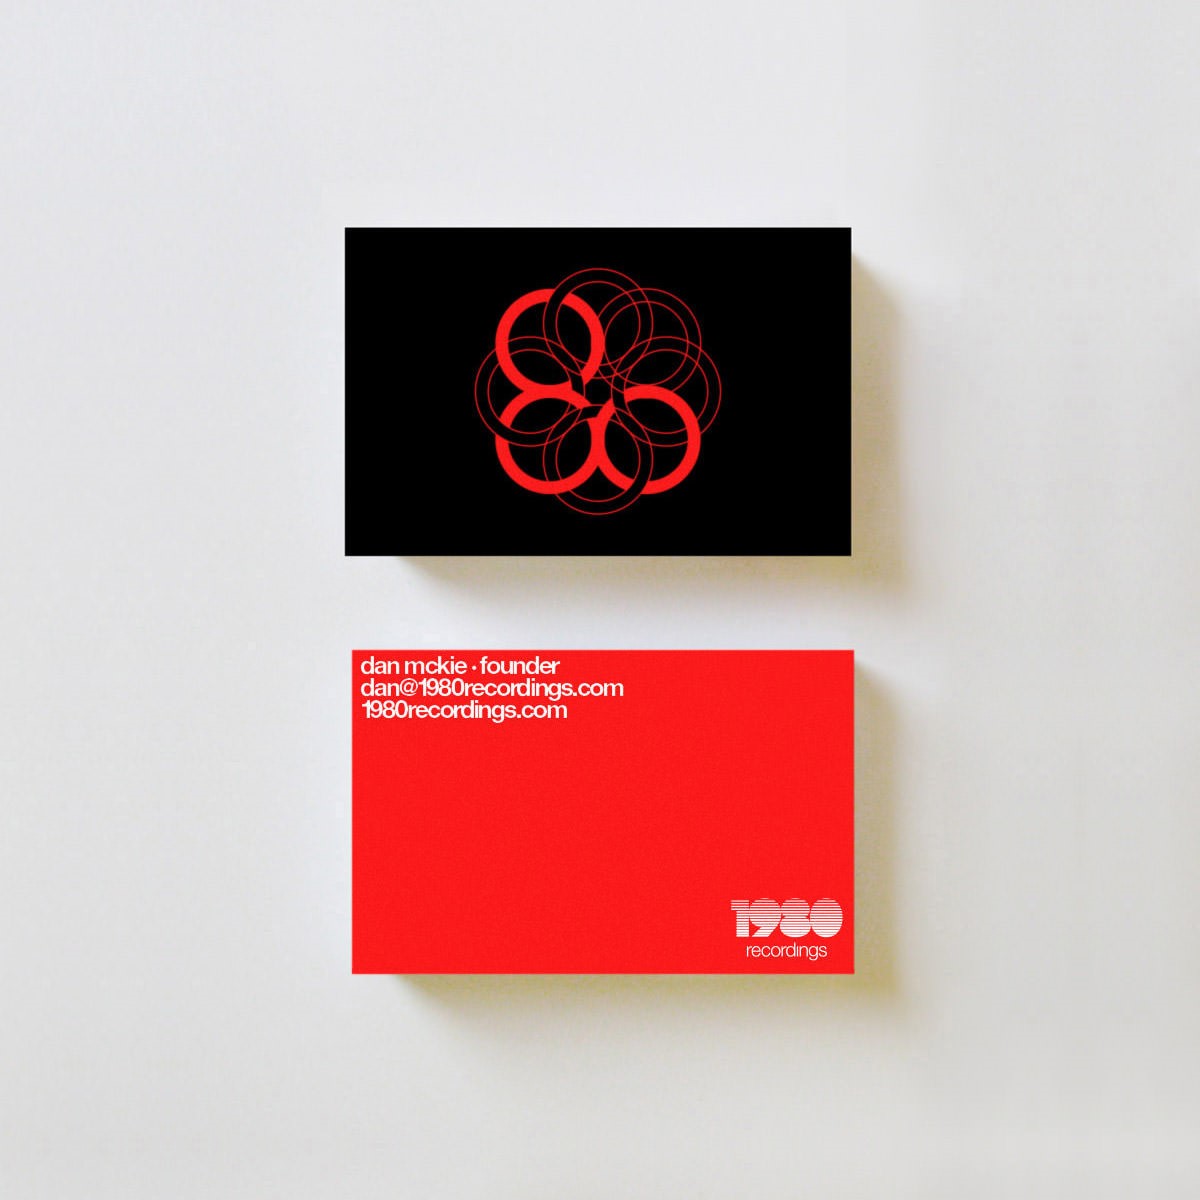 1980 Recordings. Business cards mock-up. Brand identity design by Superfried.